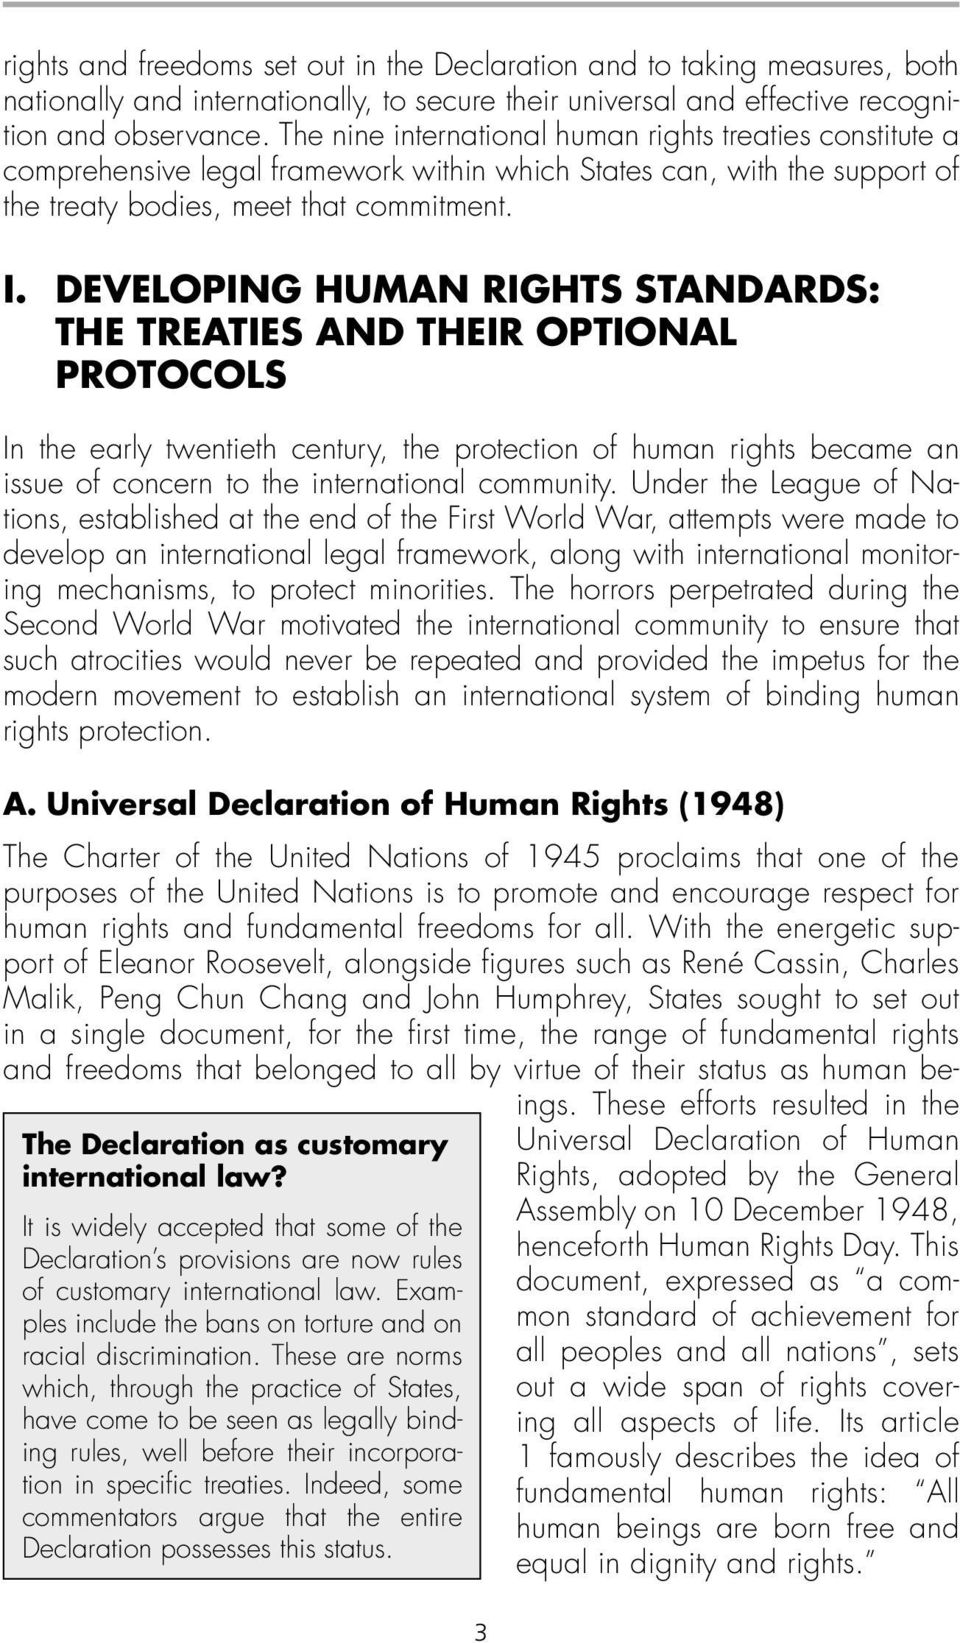 DEVELOPING HUMAN RIGHTS STANDARDS: THE TREATIES AND THEIR OPTIONAL PROTOCOLS In the early twentieth century, the protection of human rights became an issue of concern to the international community.